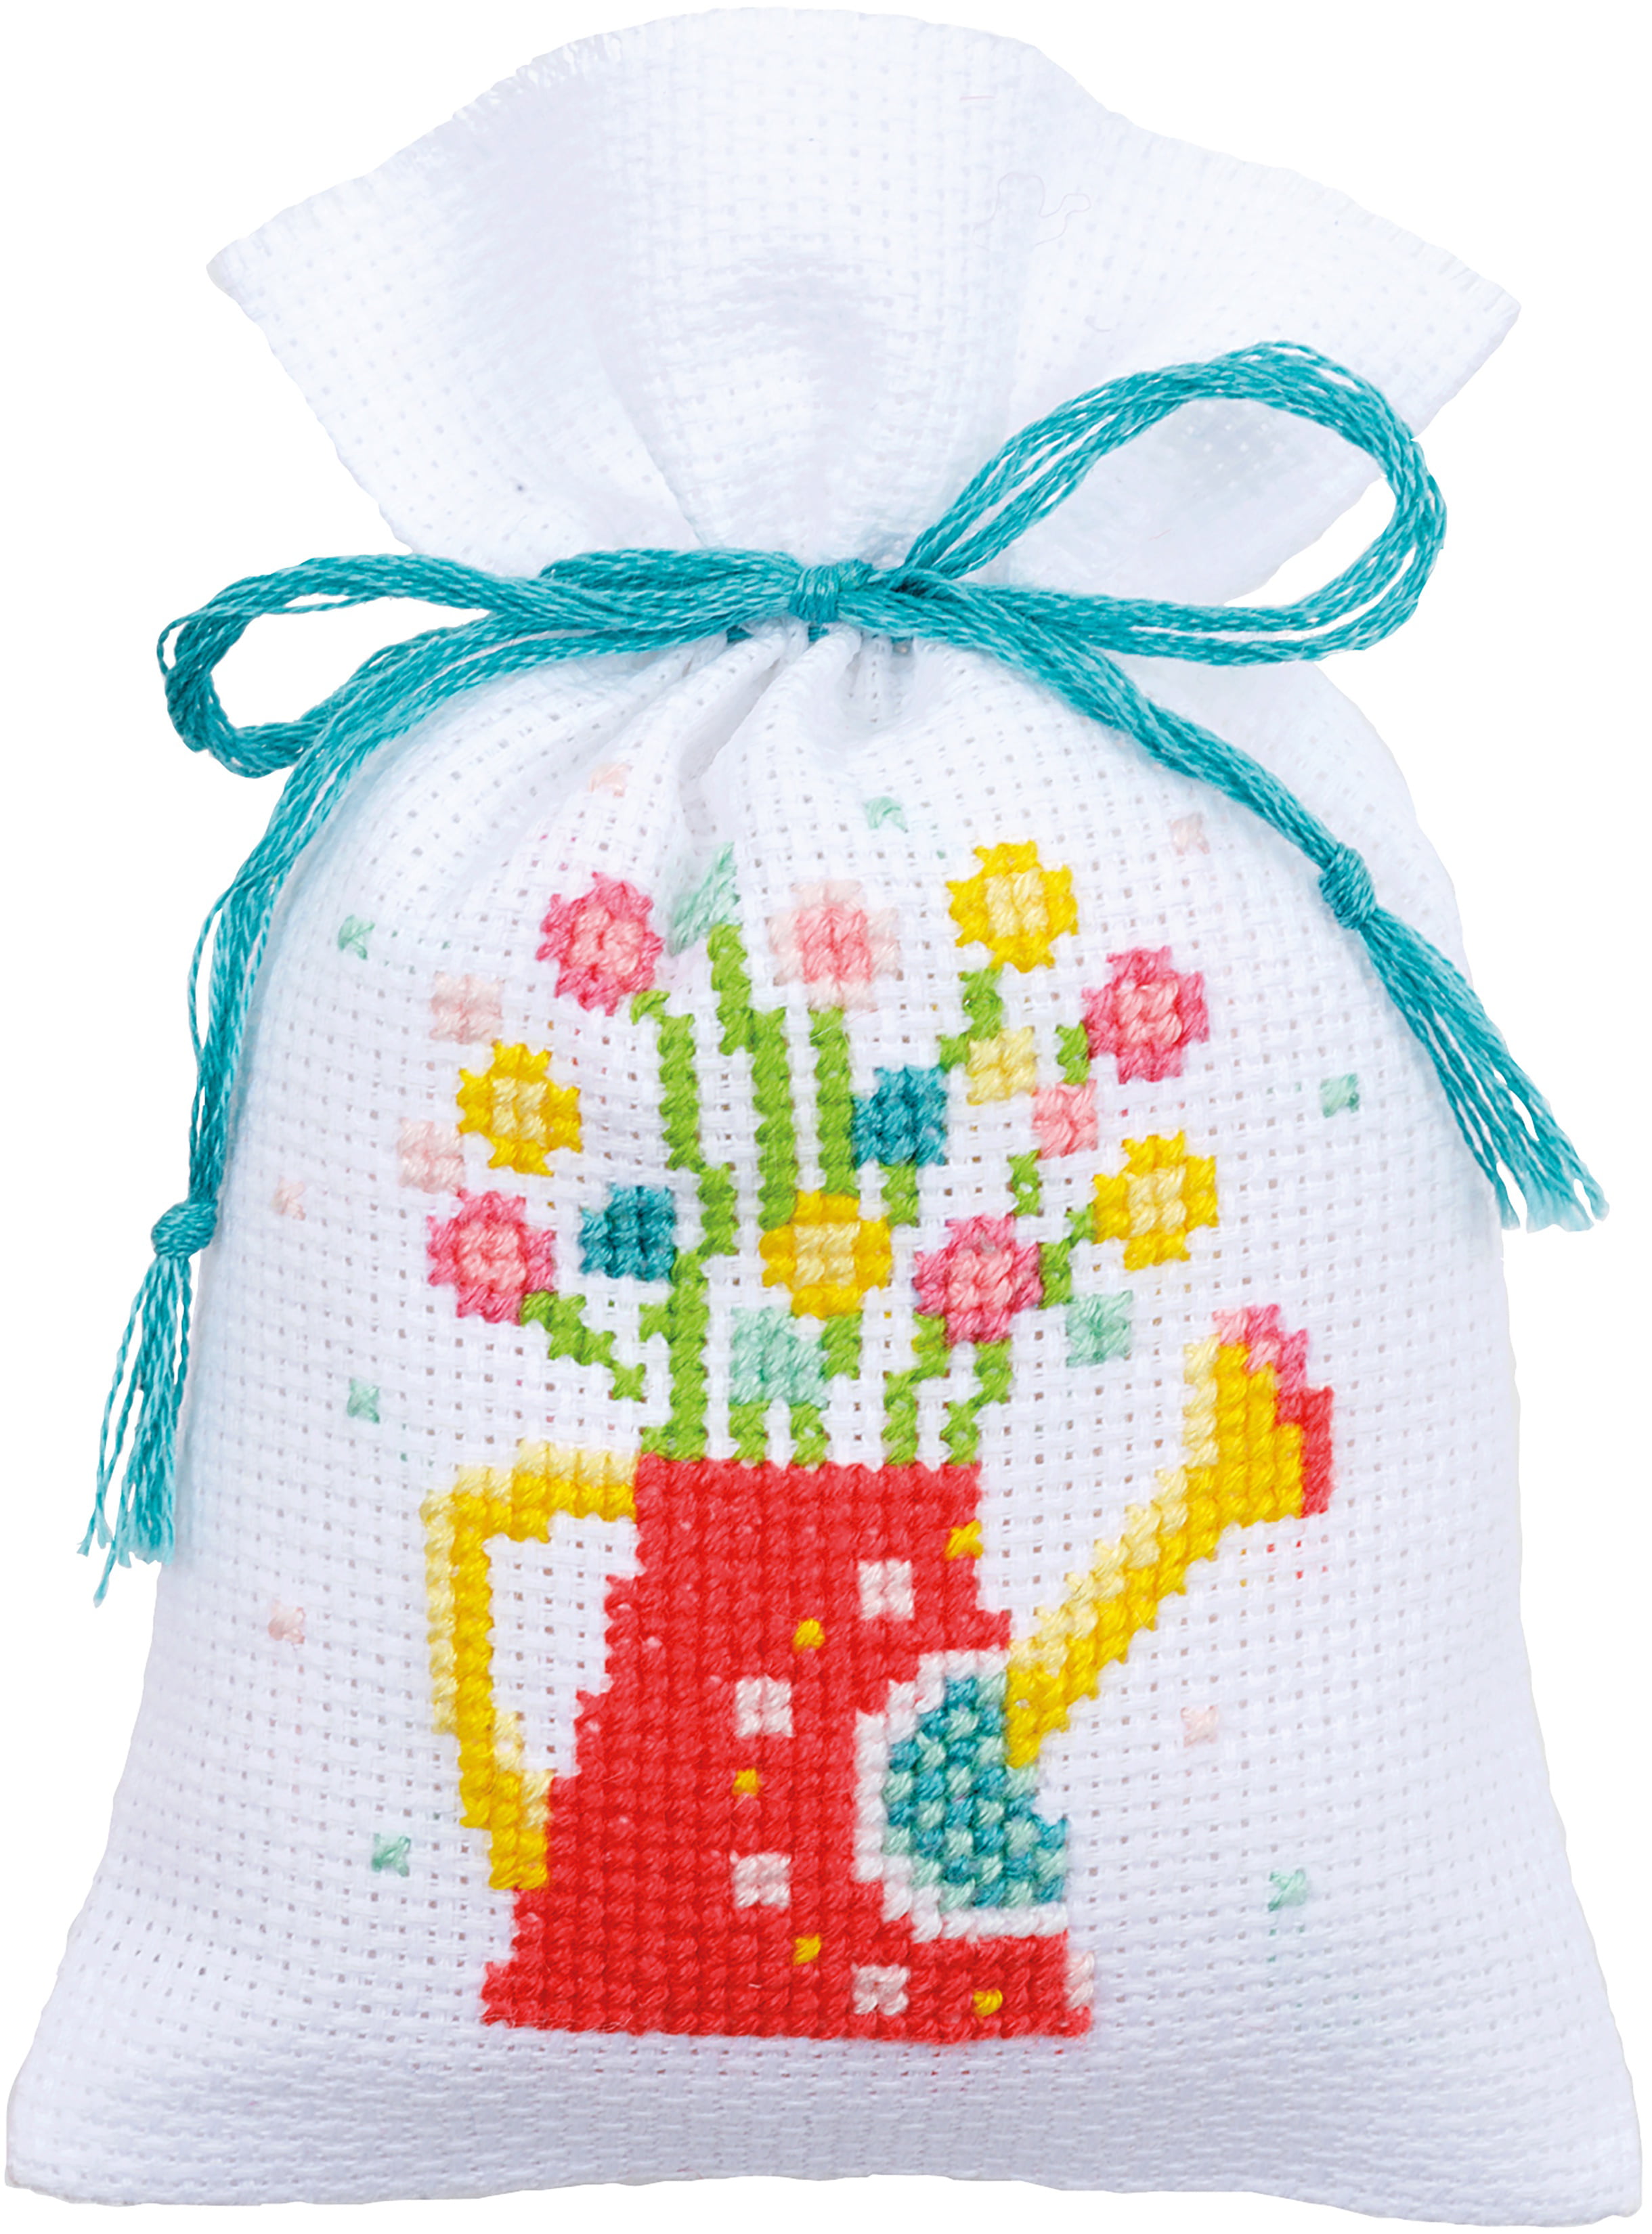 Vervaco Sachet Bags Counted Cross Stitch Kit 3.25 inchX4.75 inch-Provence (14 Count) 3/Pkg